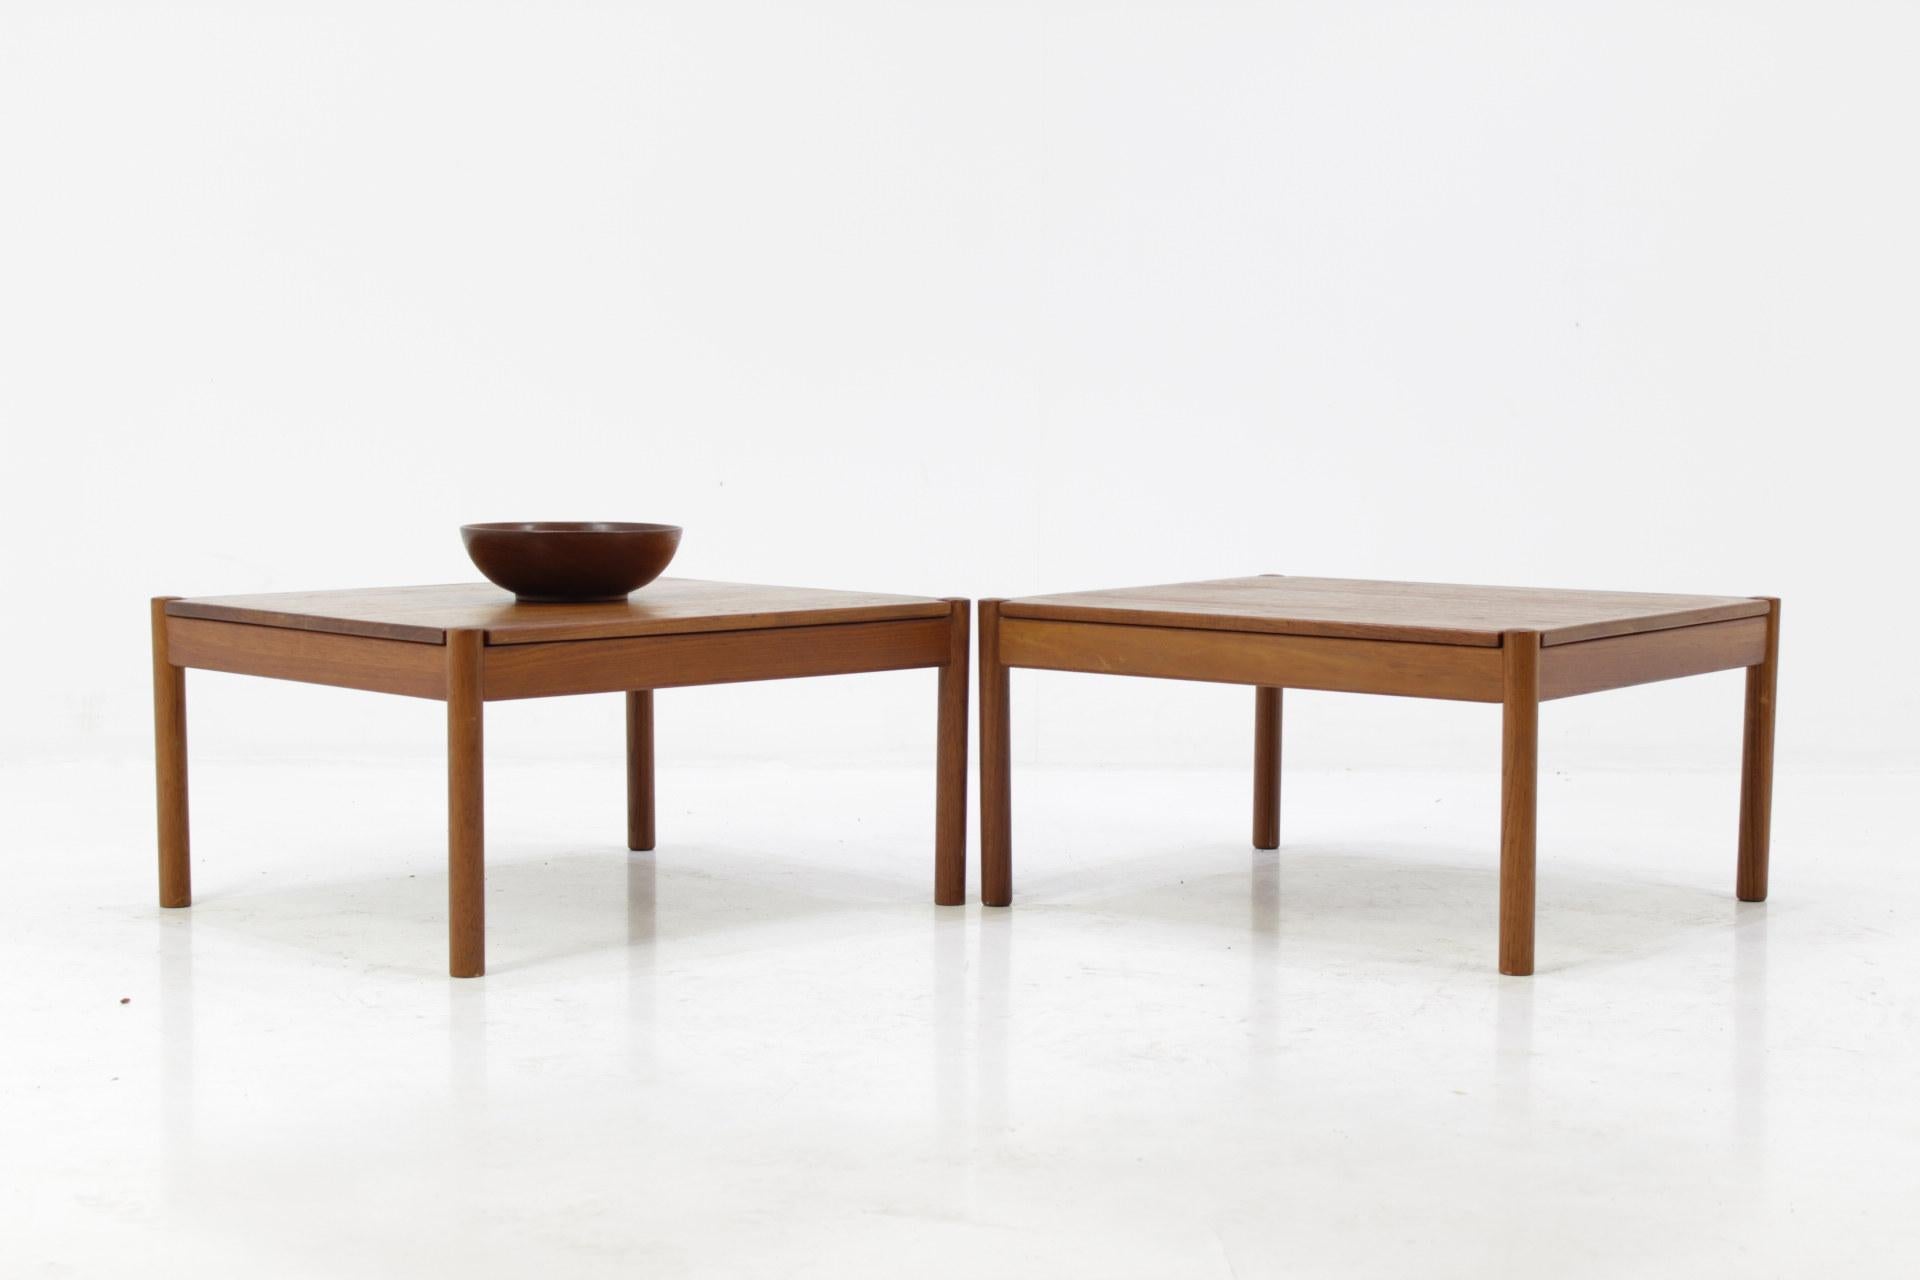 Set of two side or coffee table made from solid teak.
Designed by Magnus Olesen and produced by Durum Denmark in 1960s.
The item is in very good original condition with minor sign of wear.
The wooden legs seems to be shorter than original height